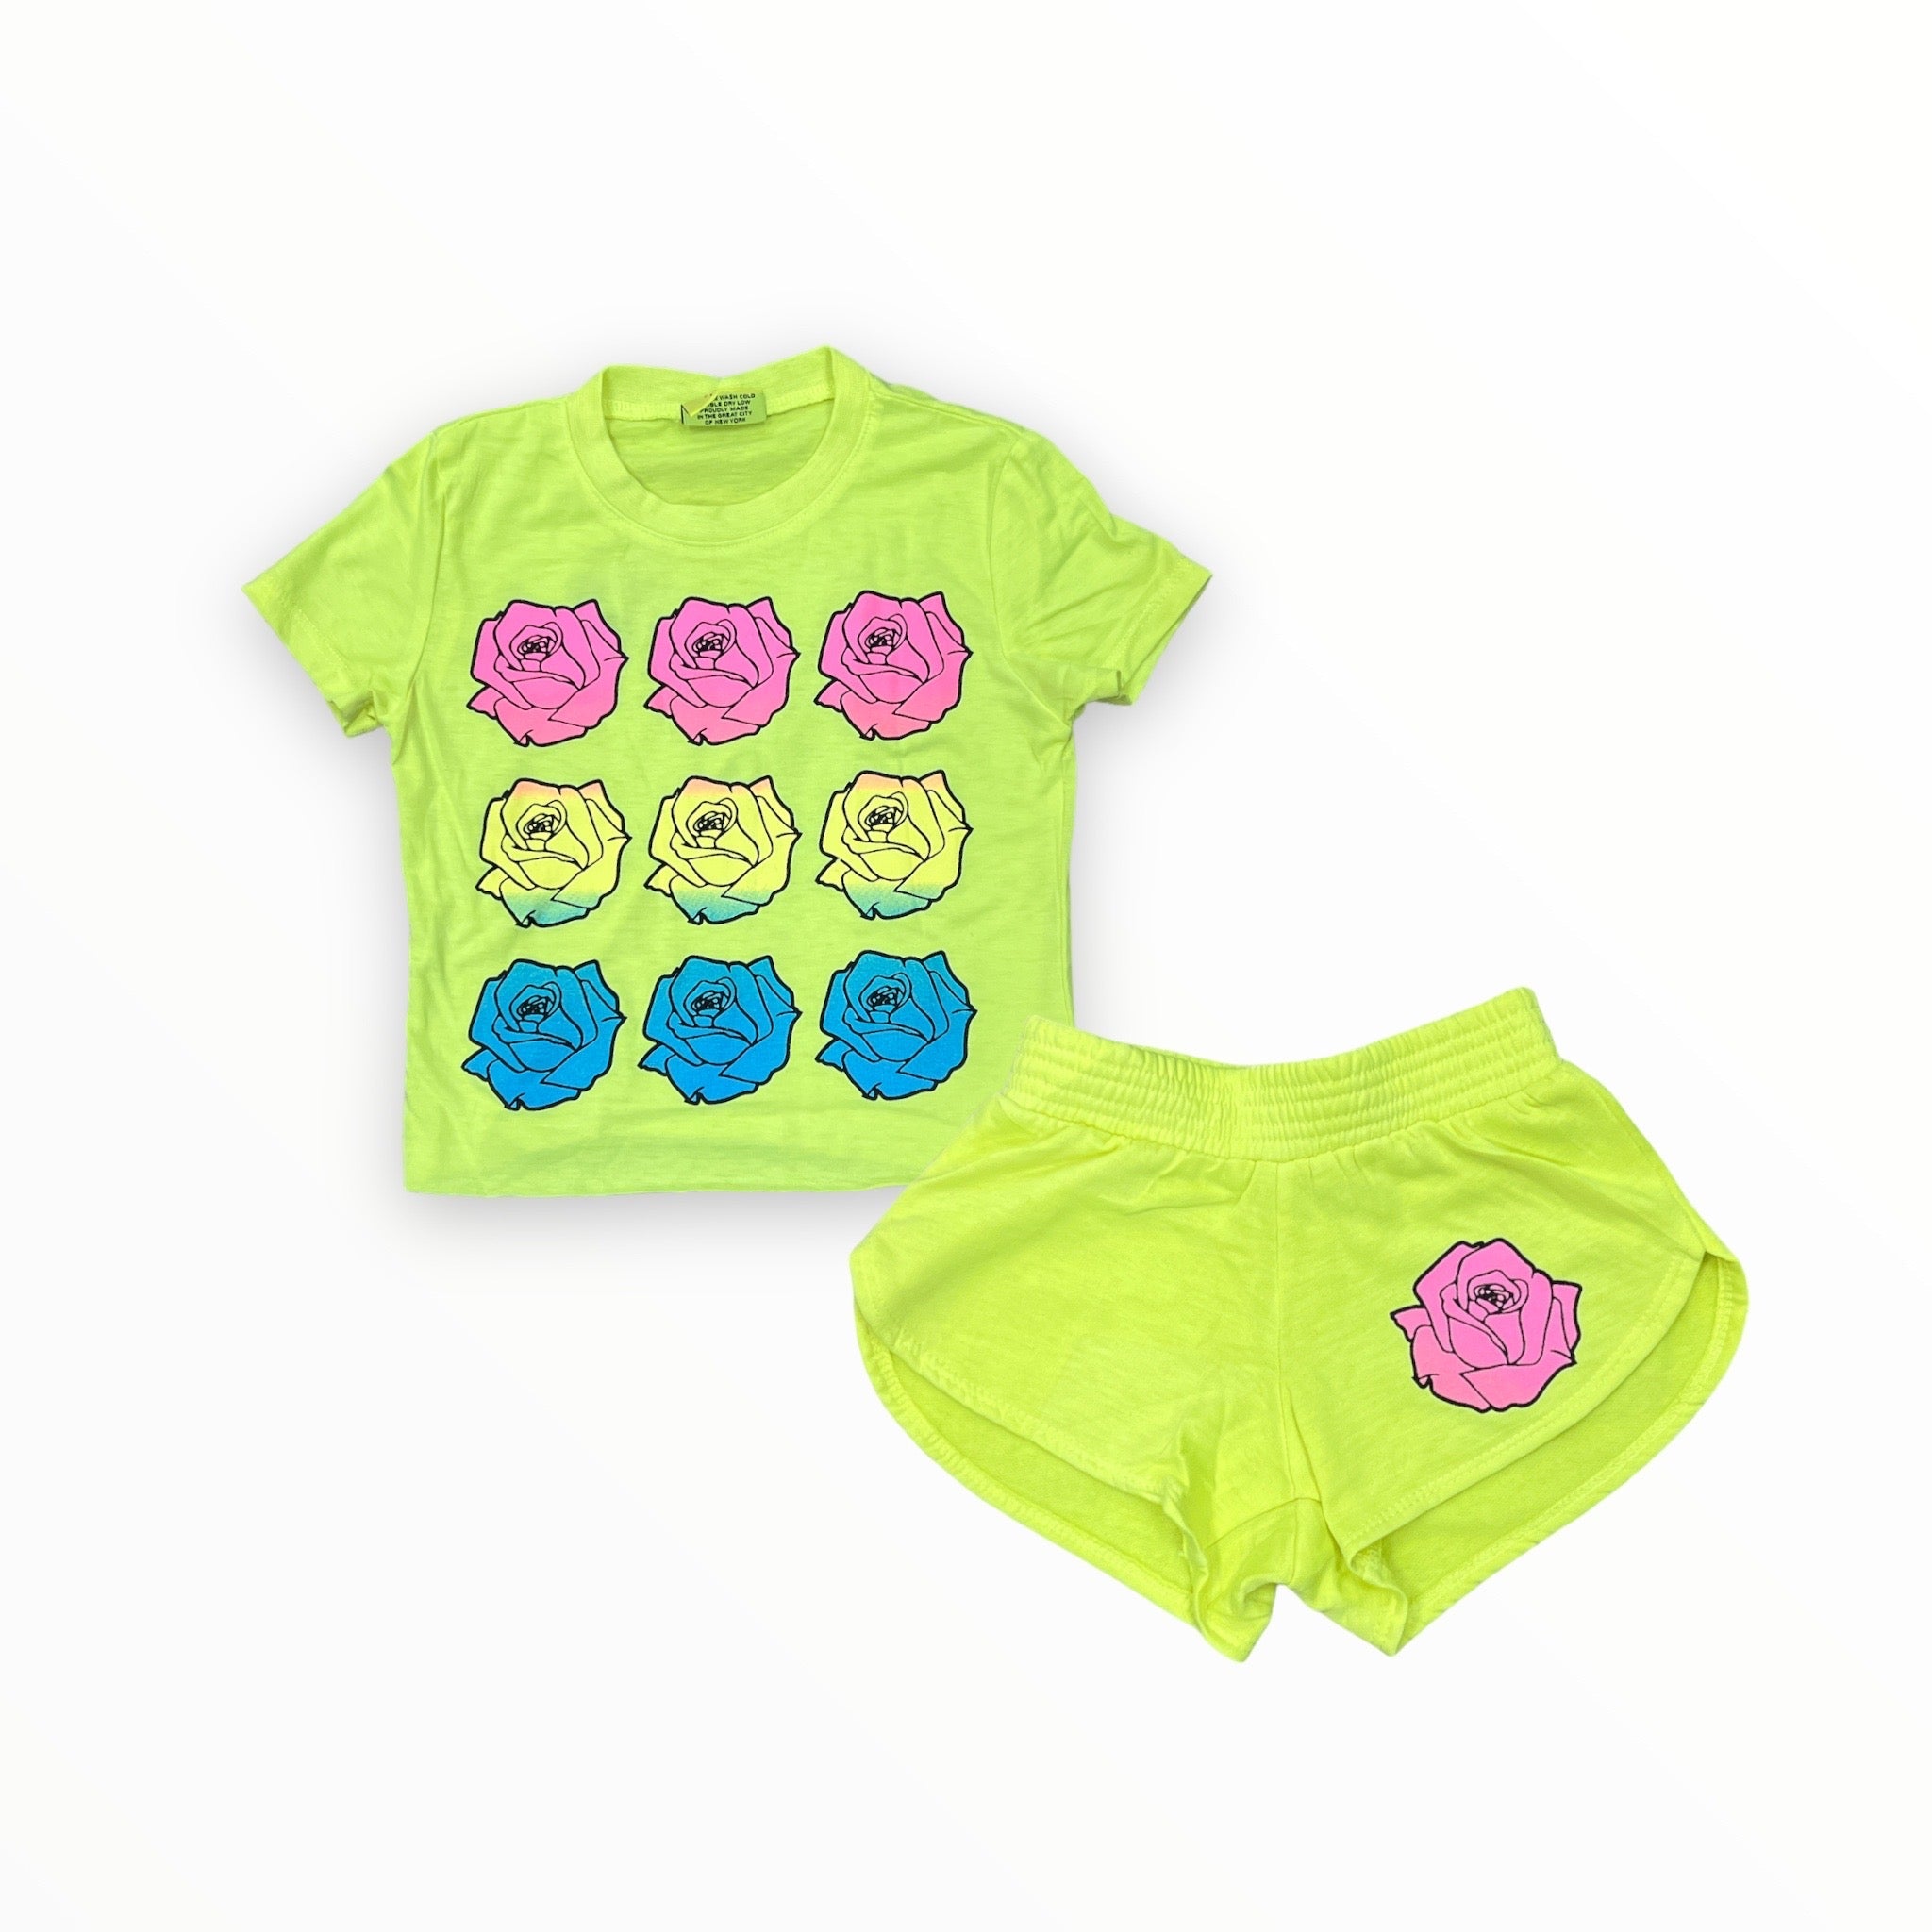 FIREHOUSE T-SHIRT - NEON YELLOW/ROSES